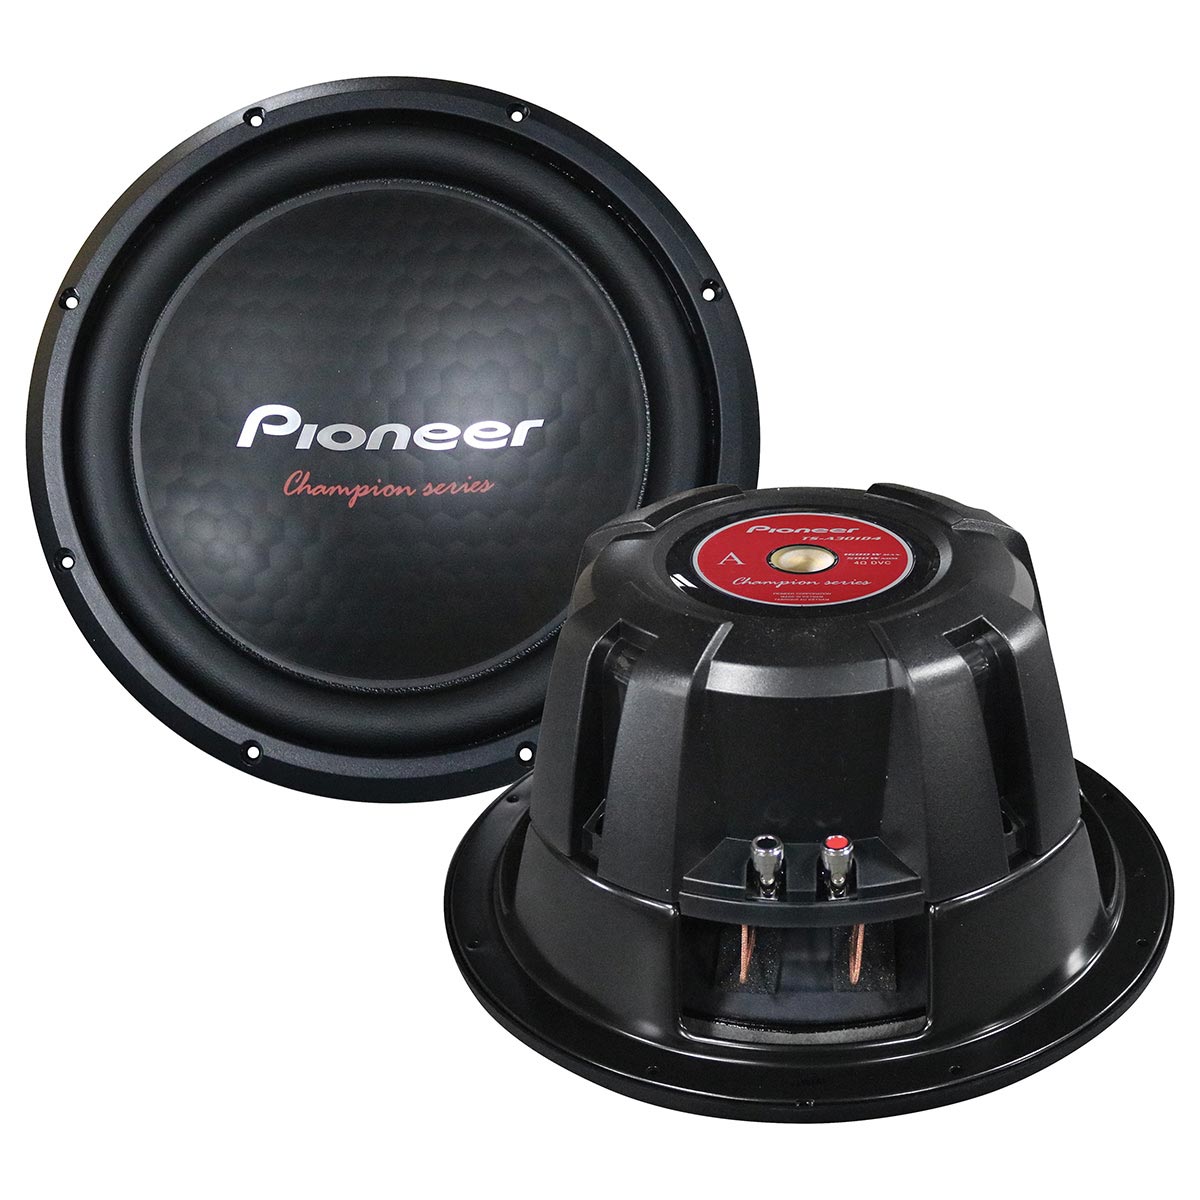 PIONEER TS-A301D4 12” Woofer 500W RMS/1600W Max Dual 4 Ohm Voice Coils